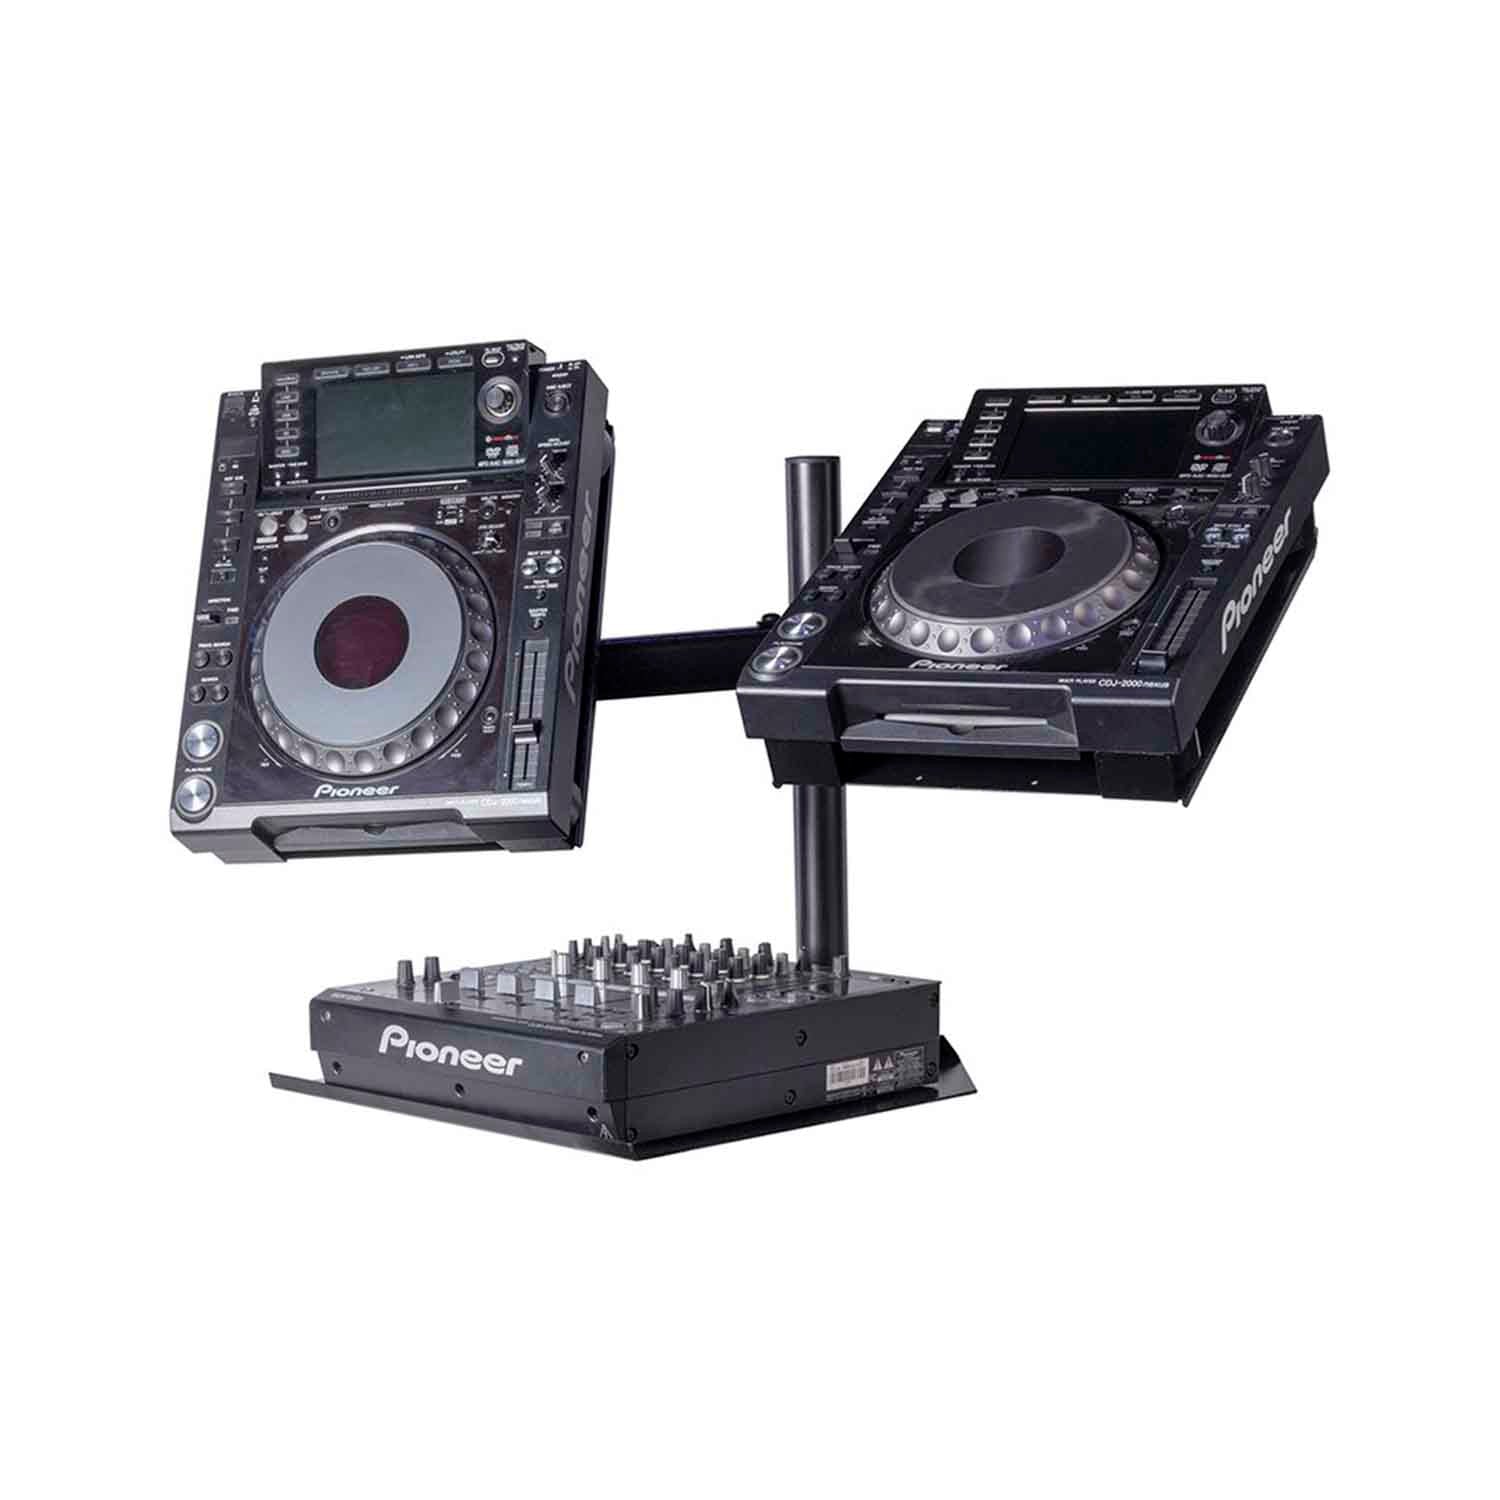 B-Stock: Headliner HL22000 Avalon CDJ Stand With Independently Adjustable Twin Arms - Hollywood DJ